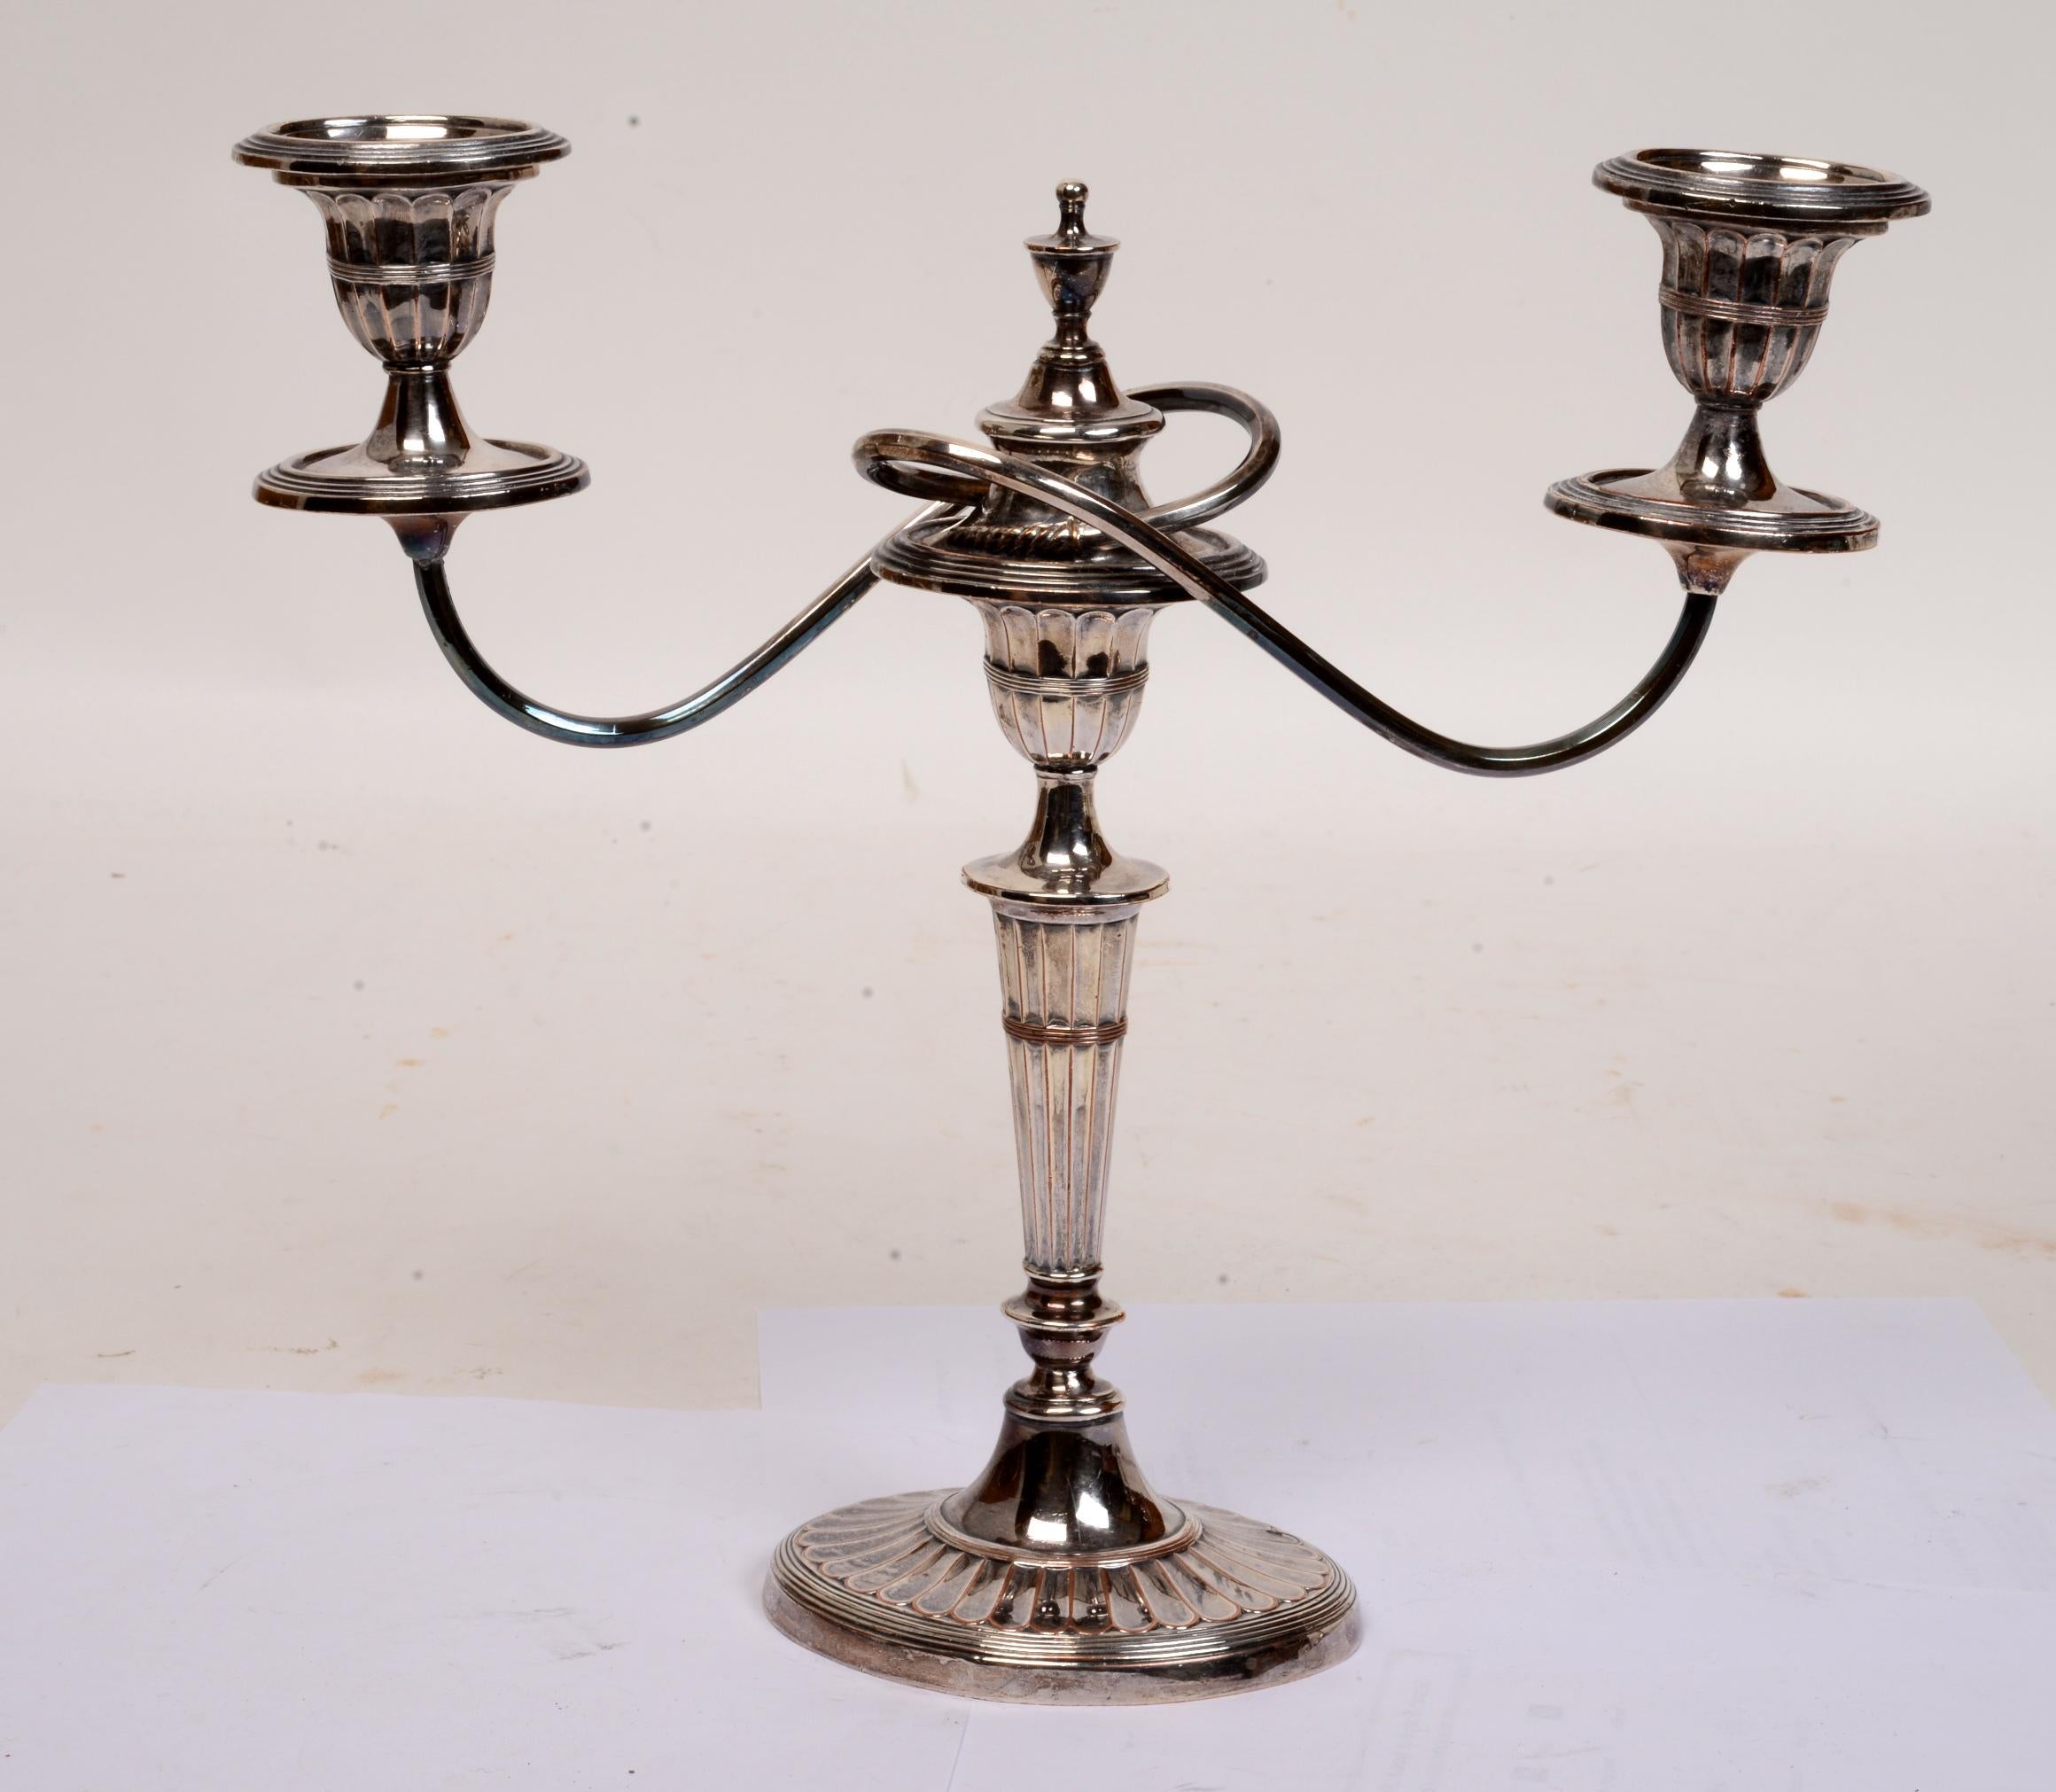 Pair of old Sheffield plate Geo III neoclassical two-light candelabra, circa 1800. The branch arms are removable to convert the candelabra into a pair of candlesticks. The oval bases have 